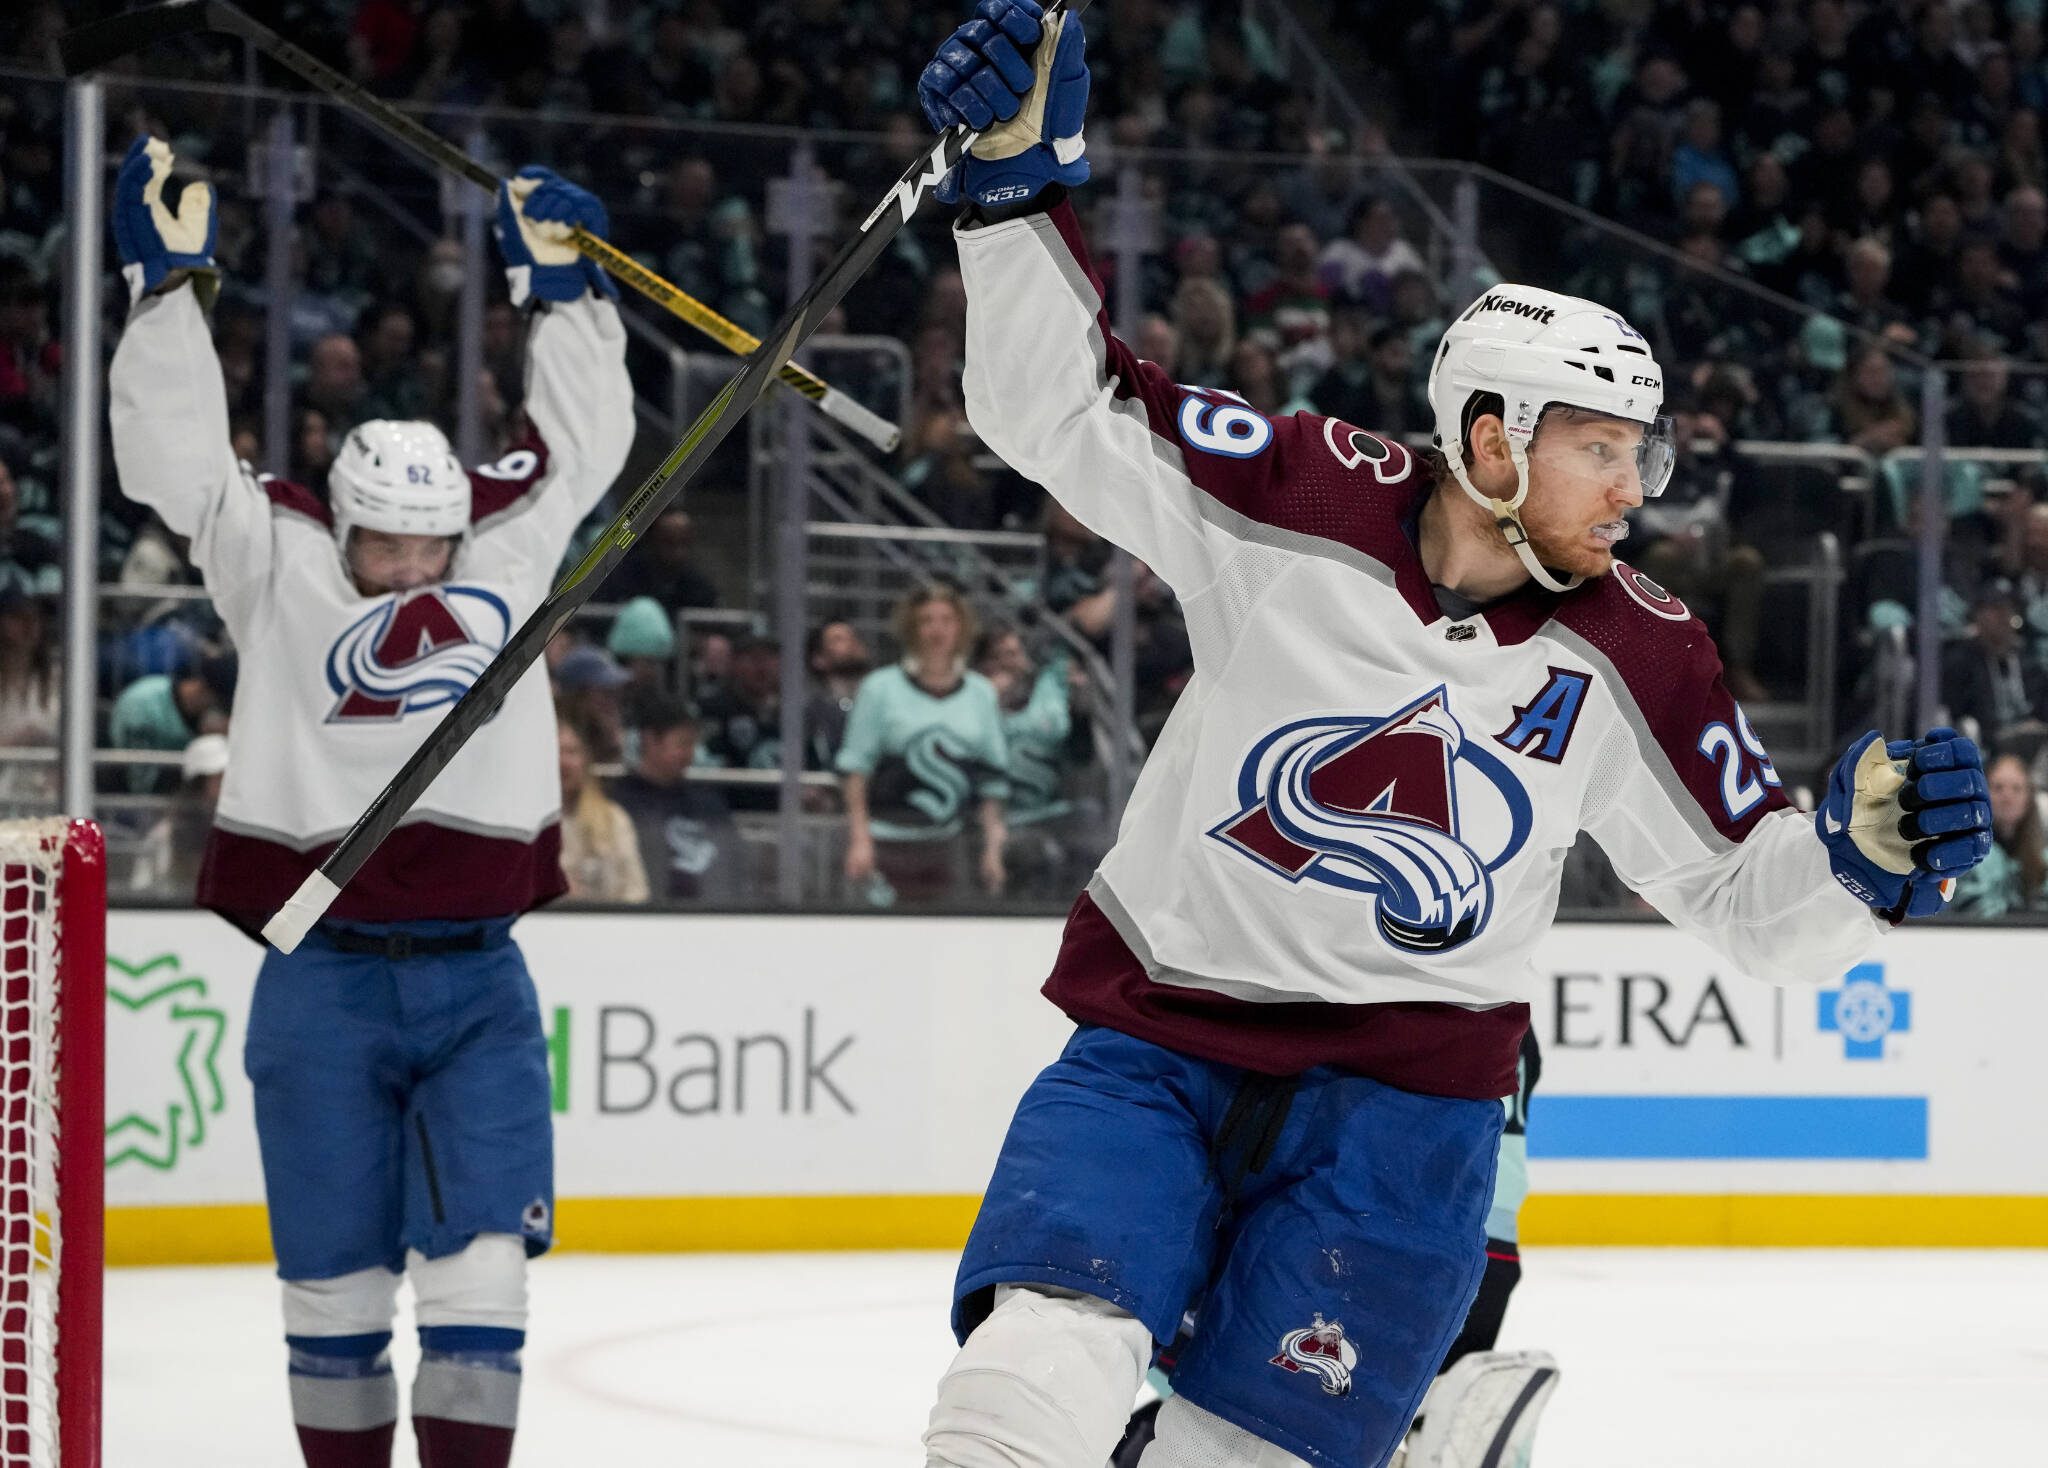 Avalanche center Nathan MacKinnon (29) and left wing Artturi Lehkonen celebrate a goal by Erik Johnson against the Kraken during the second period of Game 6 of a first-round playoff series Friday in Seattle. (AP Photo/Lindsey Wasson)